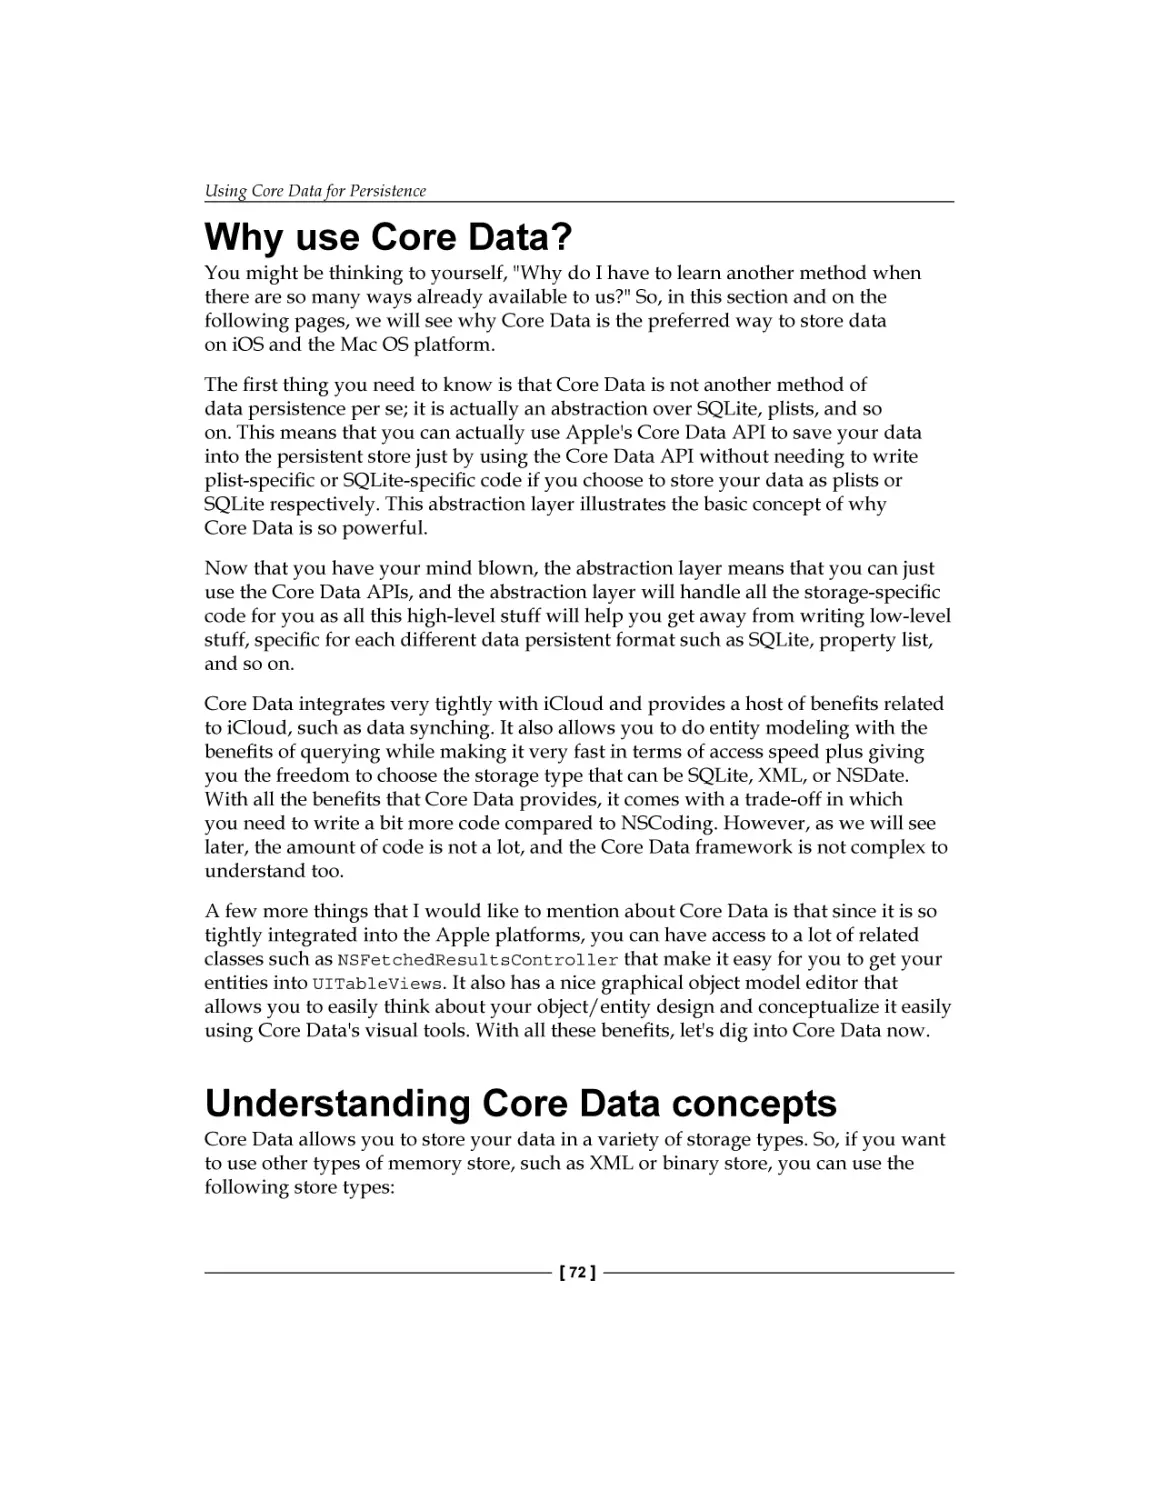 Why use Core Data?
Understanding Core Data concepts